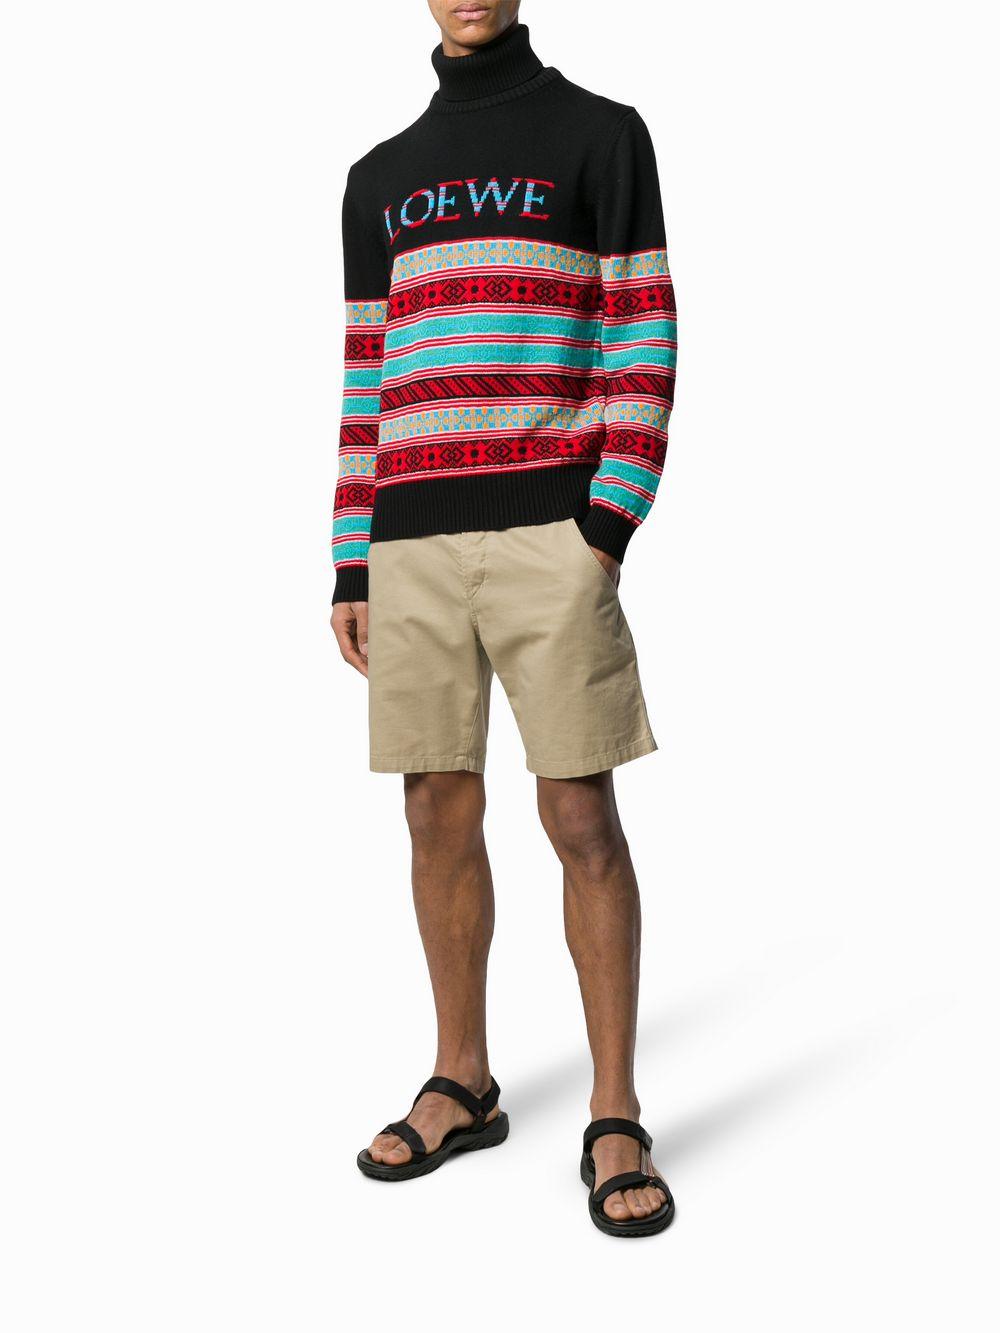 Loewe Wool Black And Multicolor Jacquard Sweater for Men - Lyst